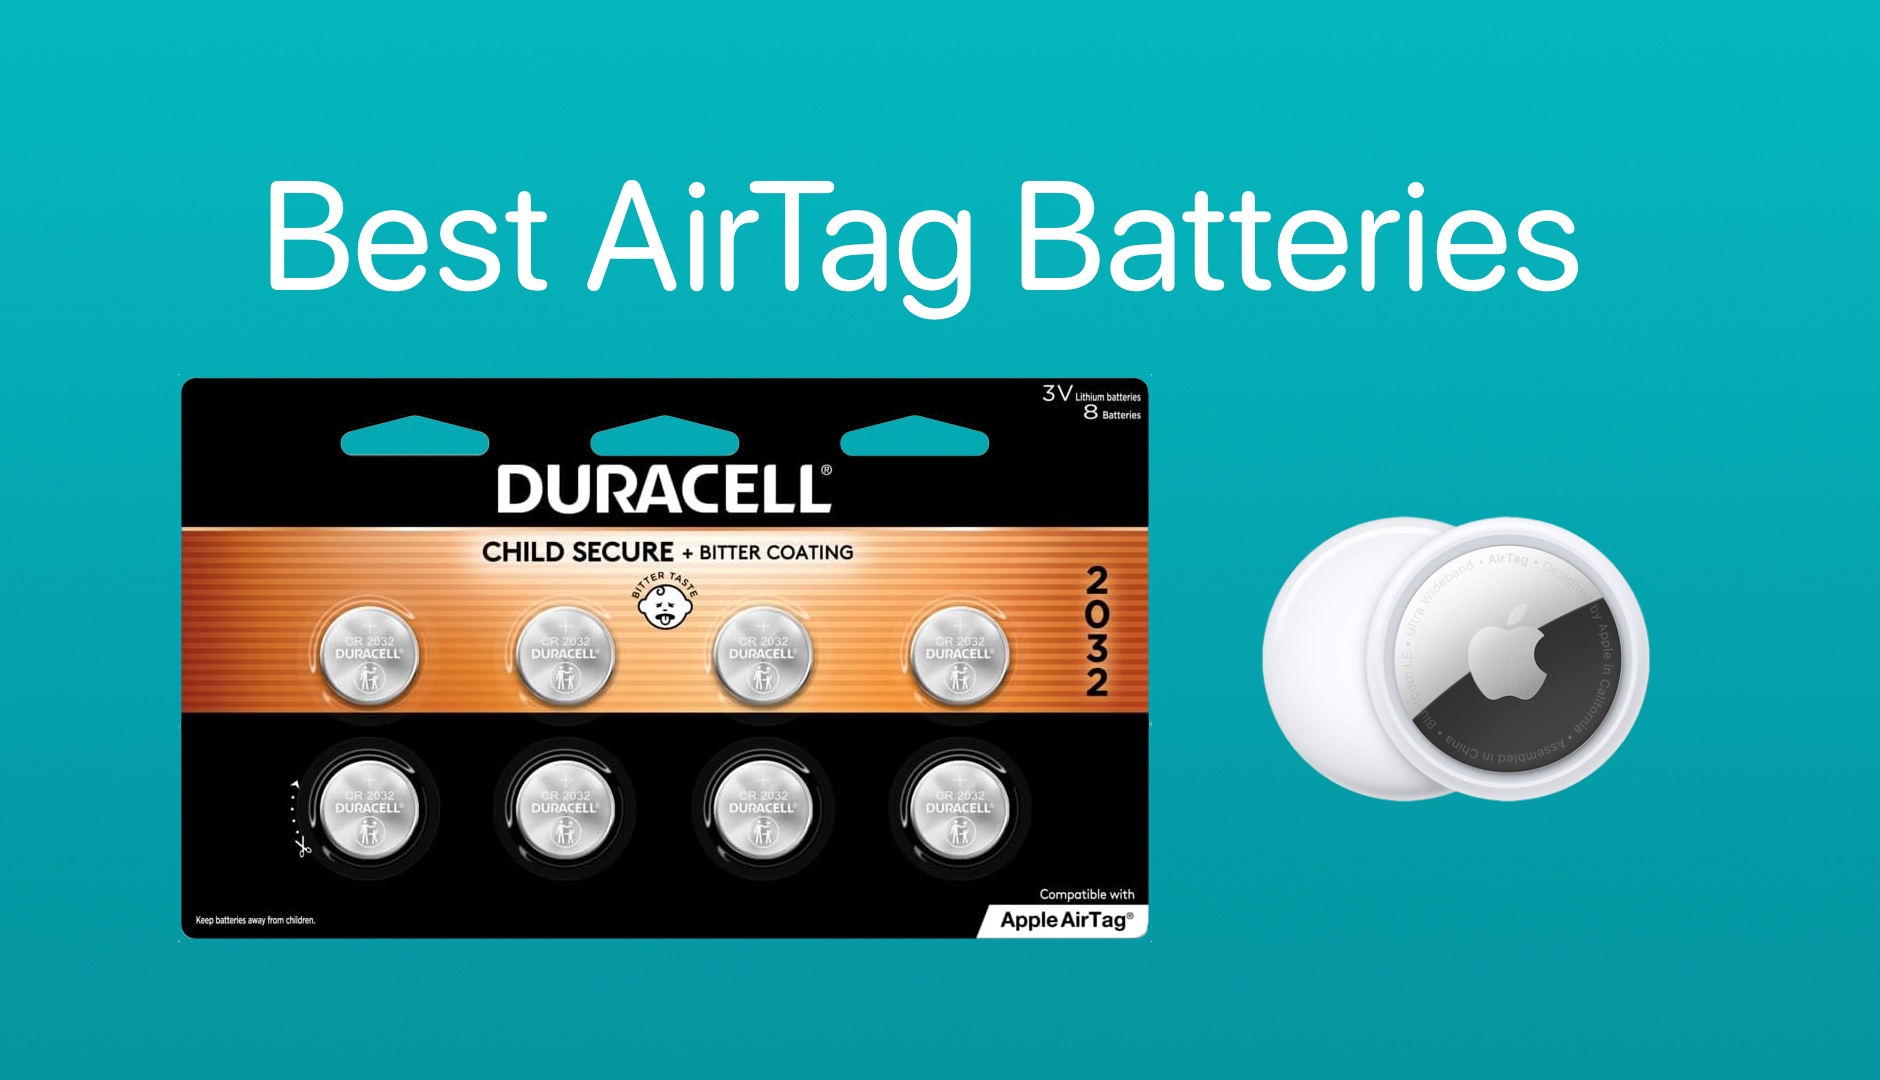 Apple Airtag Battery Duracell CR2032 Lithium coin cell battery 3V (2 pack)